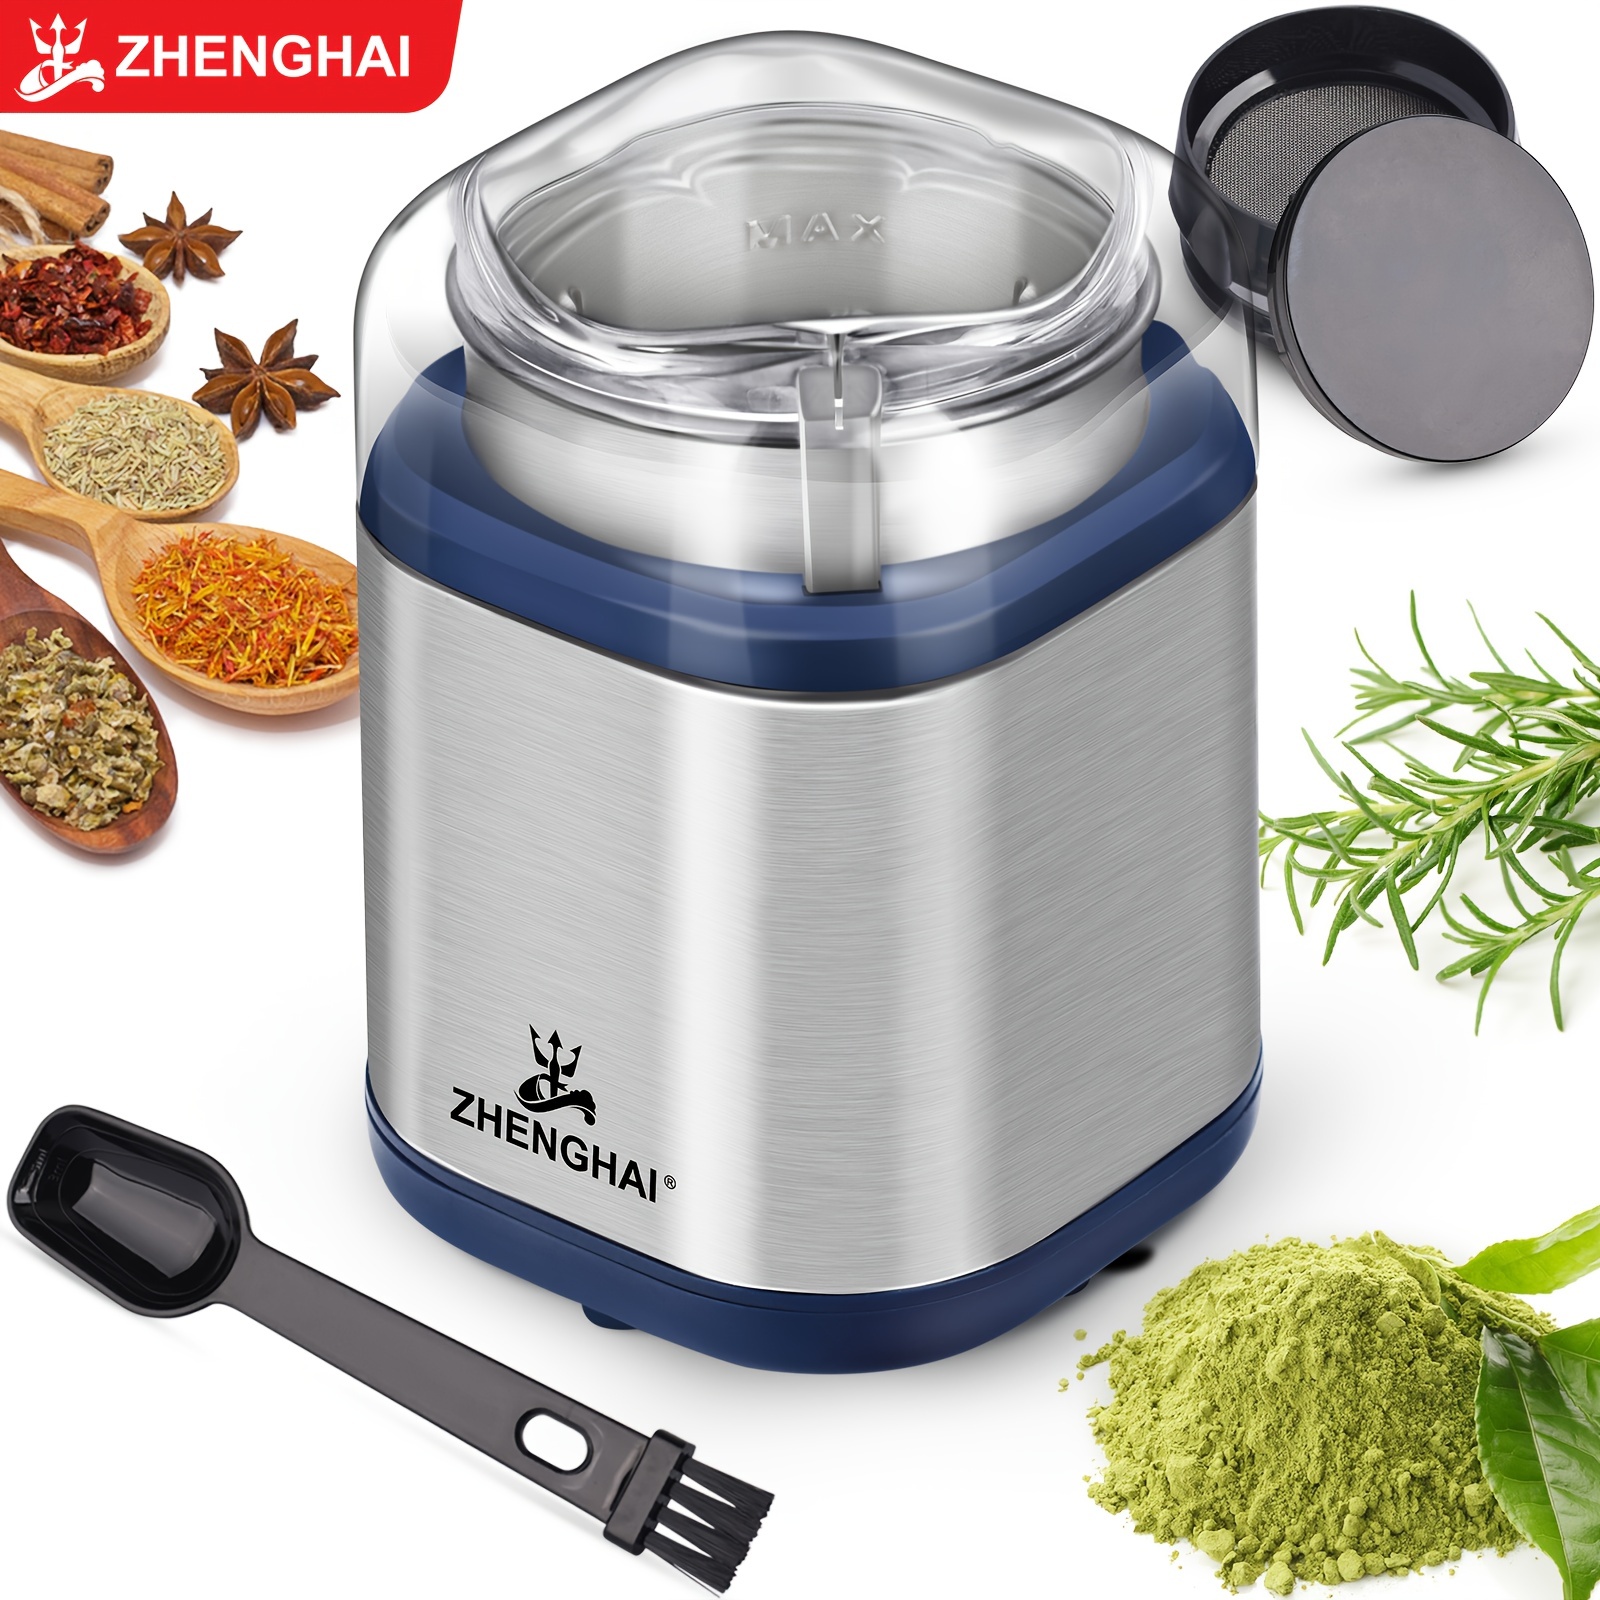  Electric Herb Grinder Pen,Handheld Smart Pollen Spices,  Built-in Rechargeable Battery and Easy to Clean (Blue): Home & Kitchen